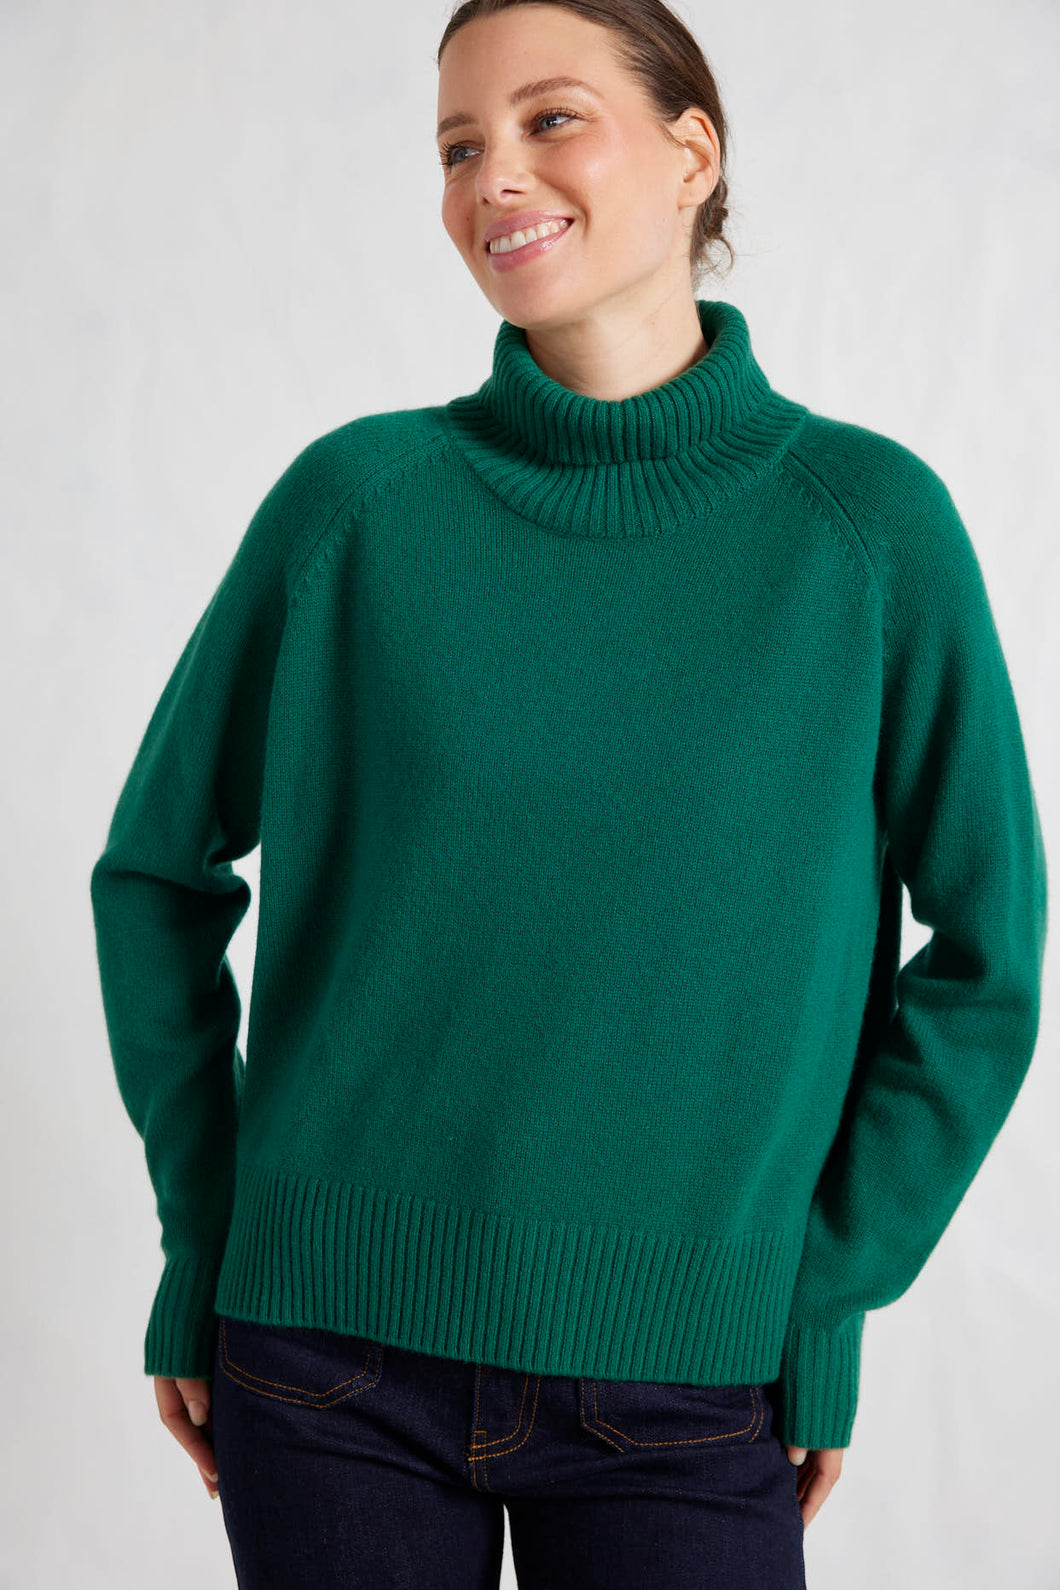 Toastie Polo in Forest Green by Alessandra